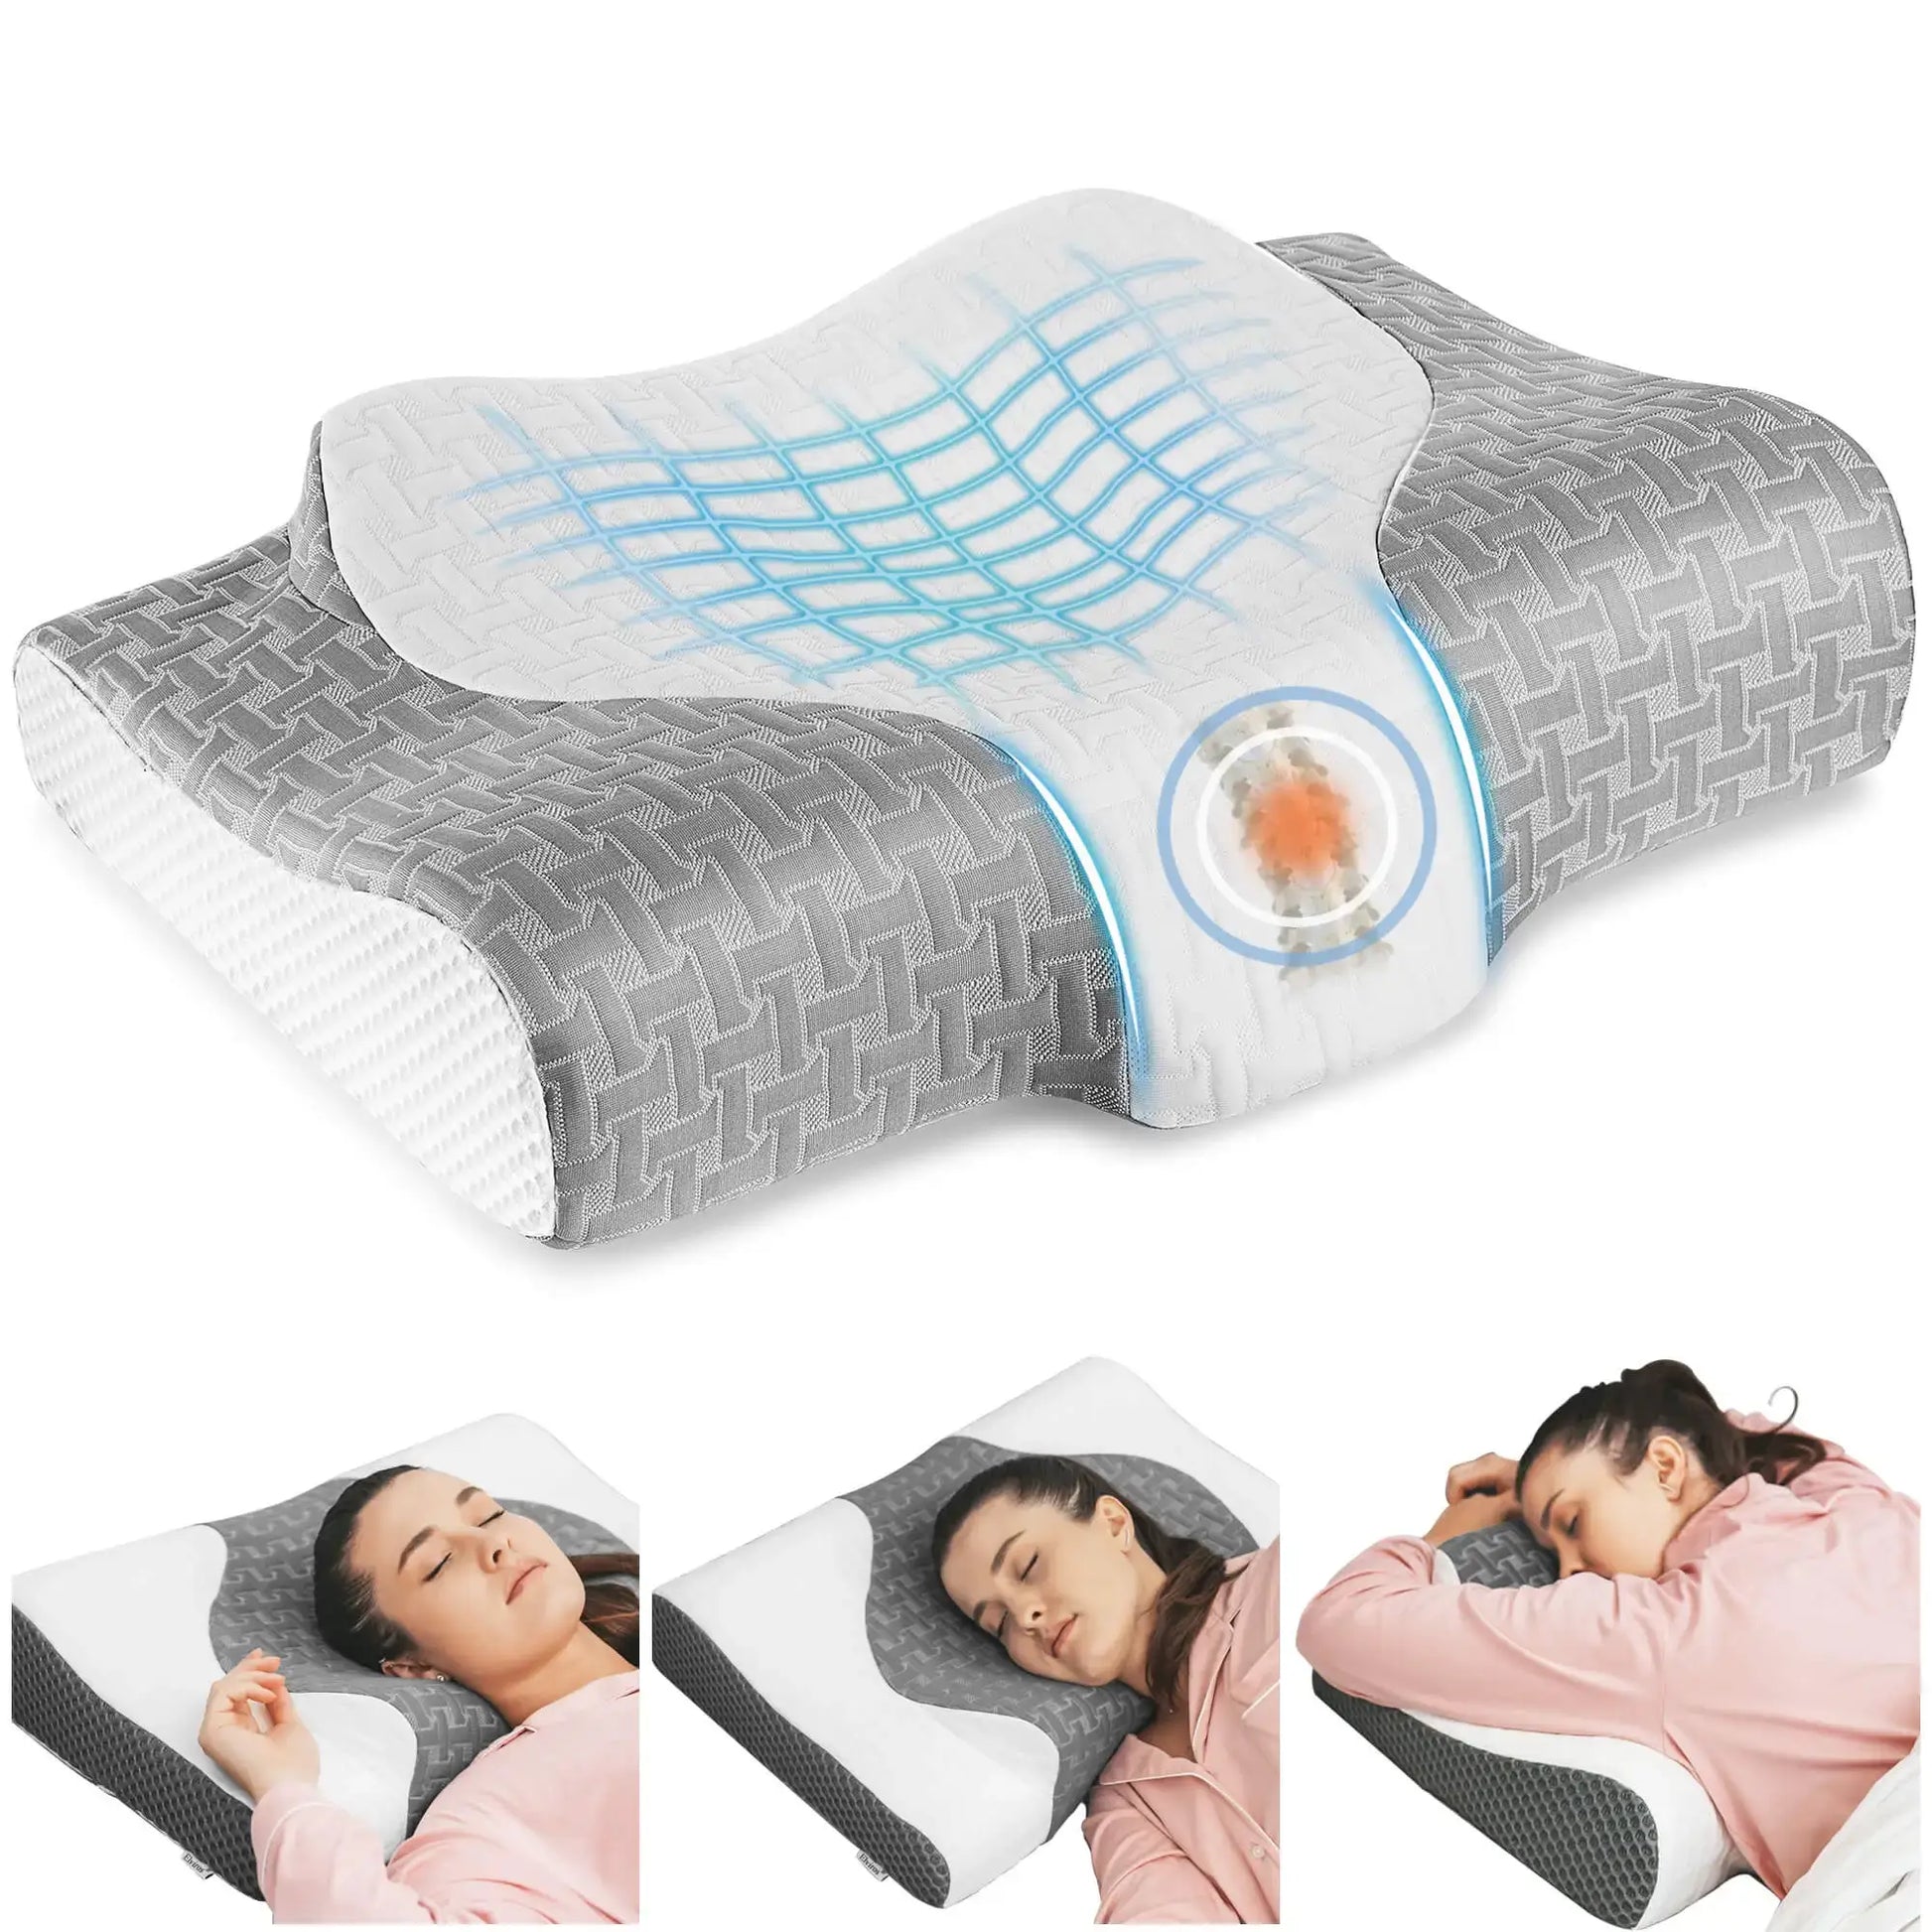 Elviros 2-in-1 Contour Orthopedic Support Pillows-1